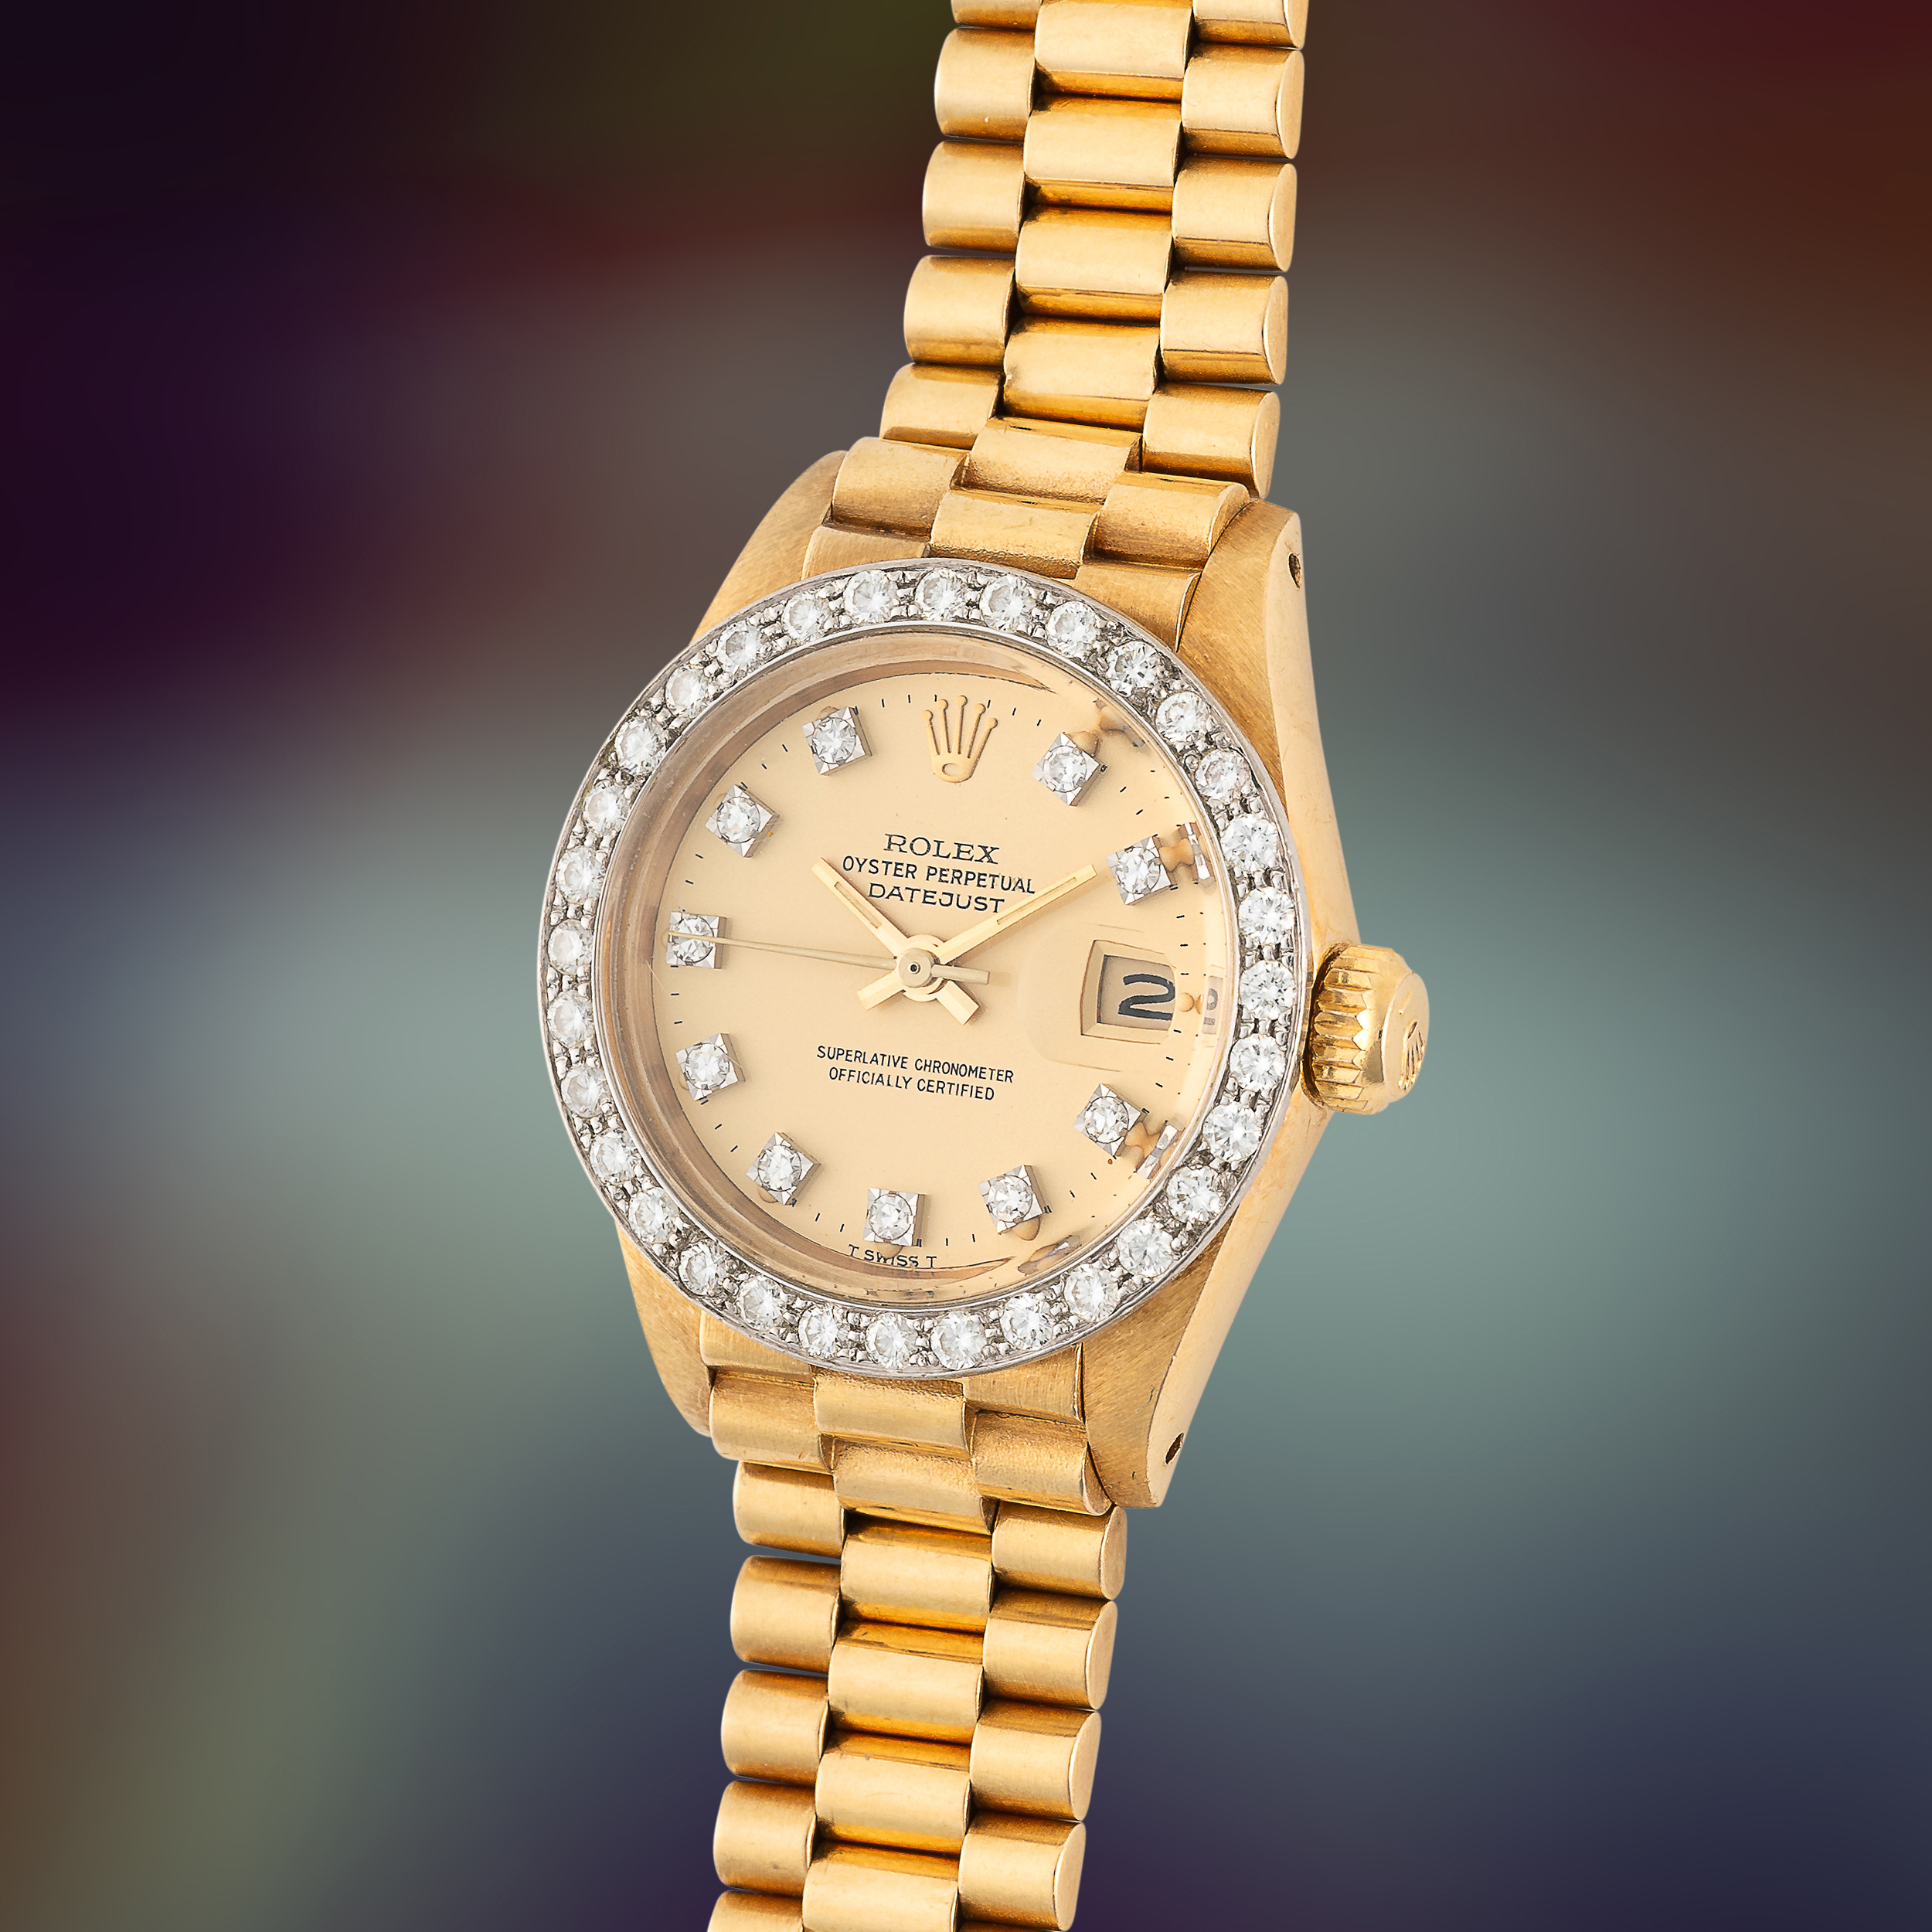 A LADY'S FINE 18K SOLID GOLD & DIAMOND ROLEX OYSTER PERPETUAL DATEJUST BRACELET WATCH CIRCA 1983,